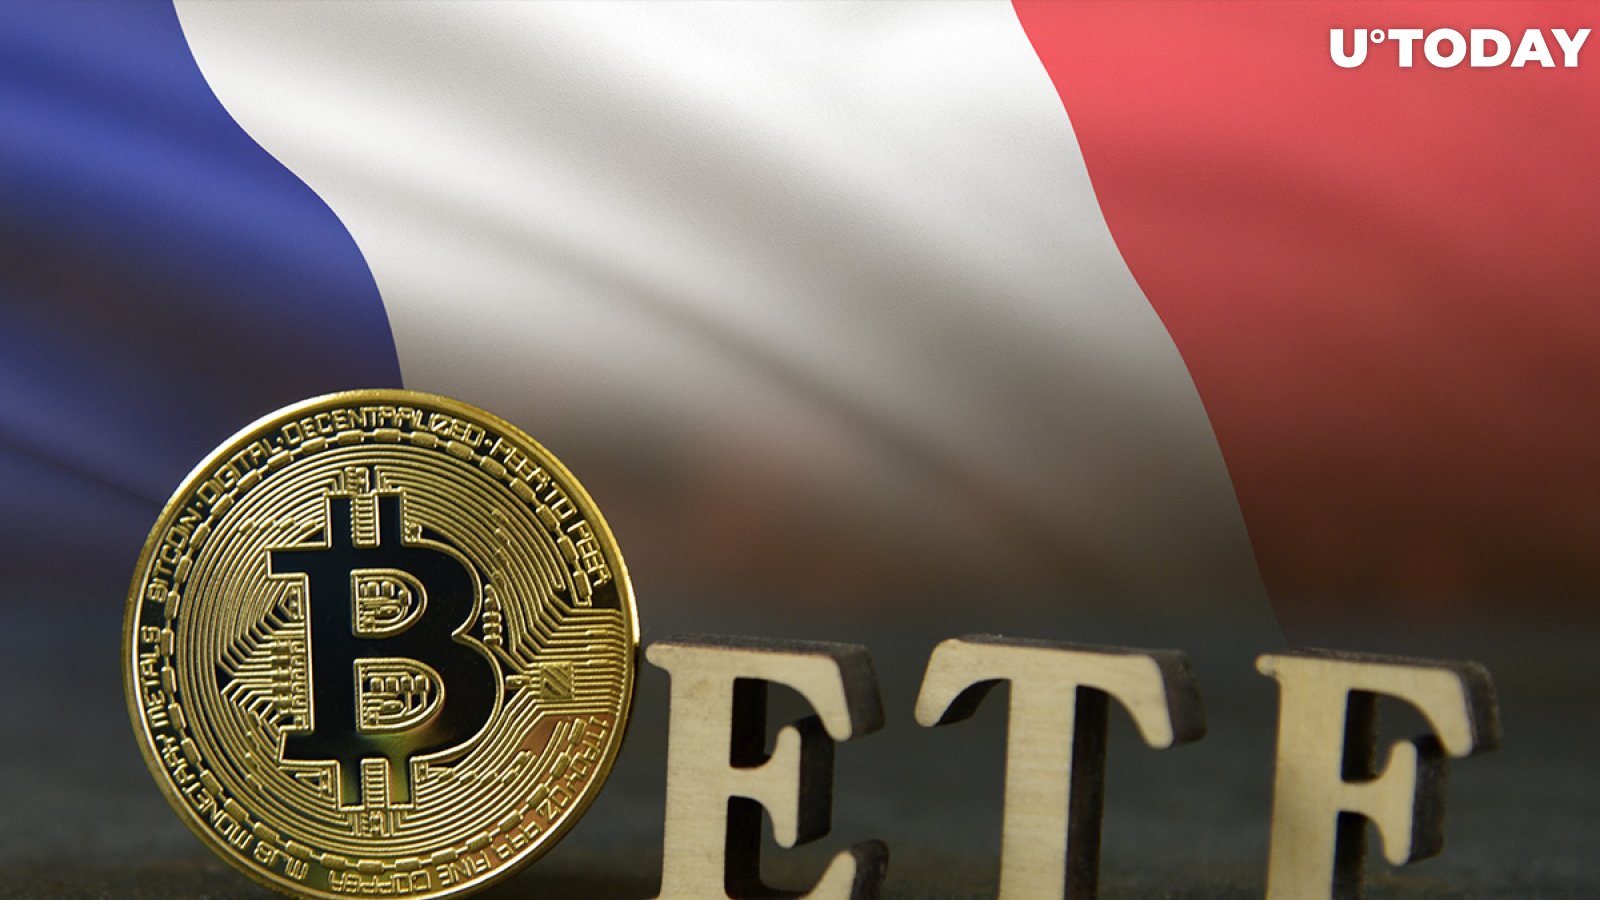 Melanion Capital Launches Europe's First Regulated Bitcoin ETF